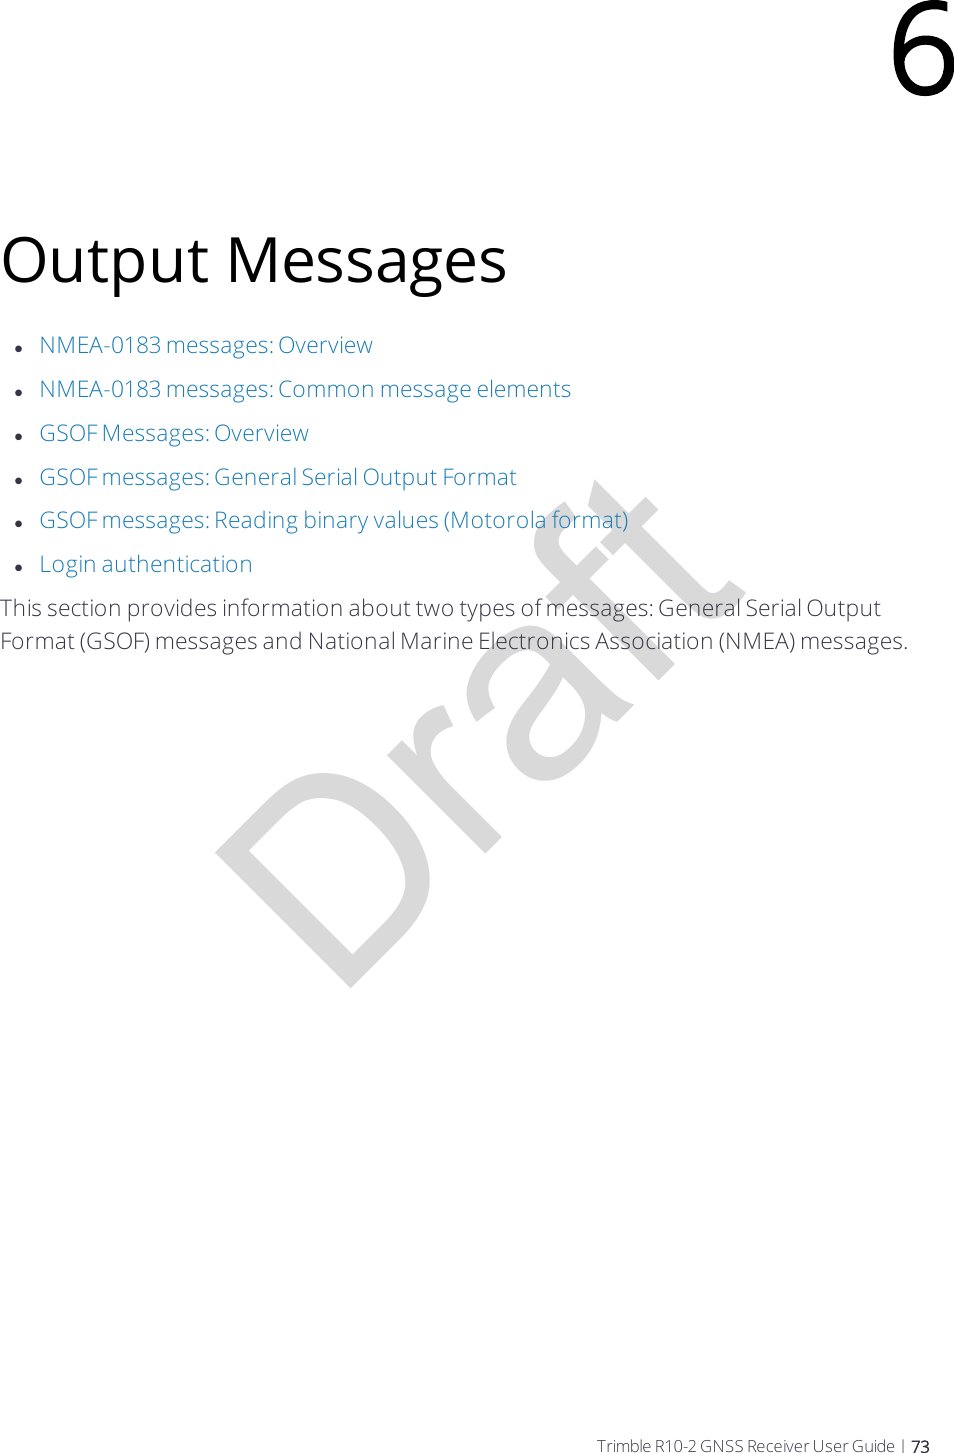 DraftOutput MessageslNMEA-0183 messages: OverviewlNMEA-0183 messages: Common message elementslGSOF Messages: OverviewlGSOF messages: General Serial Output FormatlGSOF messages: Reading binary values (Motorola format)lLogin authenticationThis section provides information about two types of messages: General Serial Output Format (GSOF) messages and National Marine Electronics Association (NMEA) messages.6Trimble R10-2 GNSS Receiver User Guide | 73